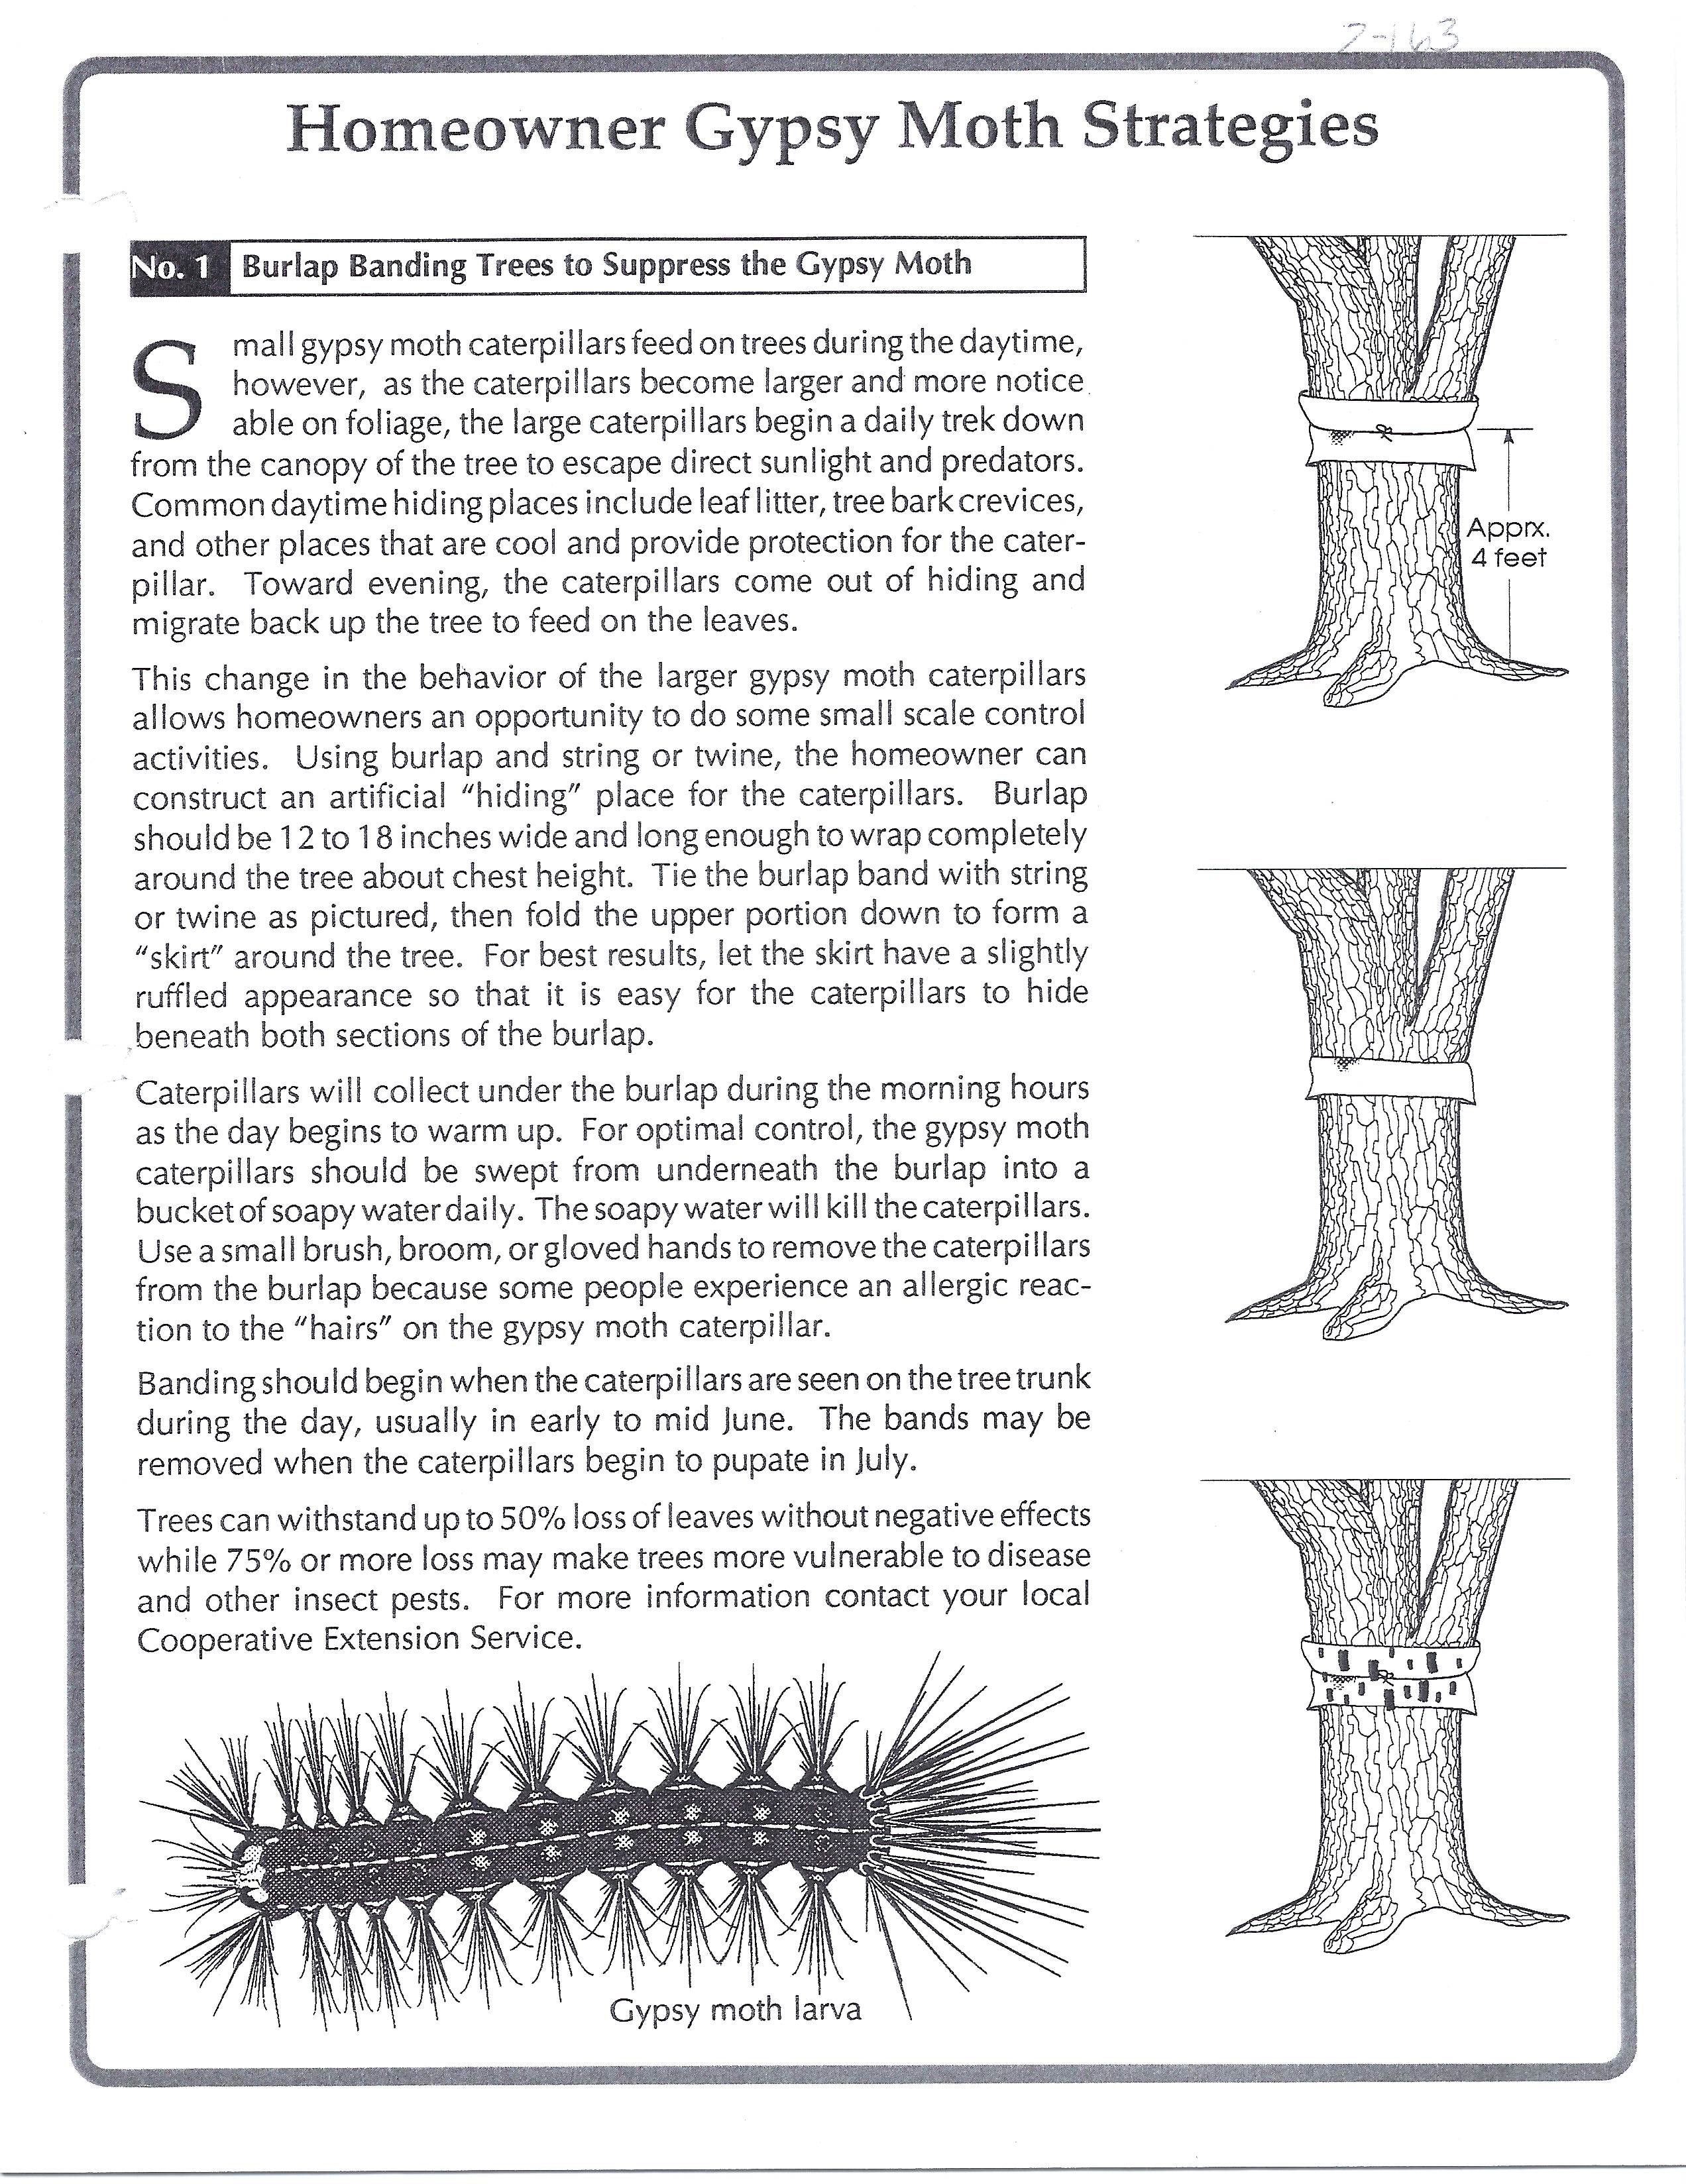 Info about controlling gypsy moth_Page_2